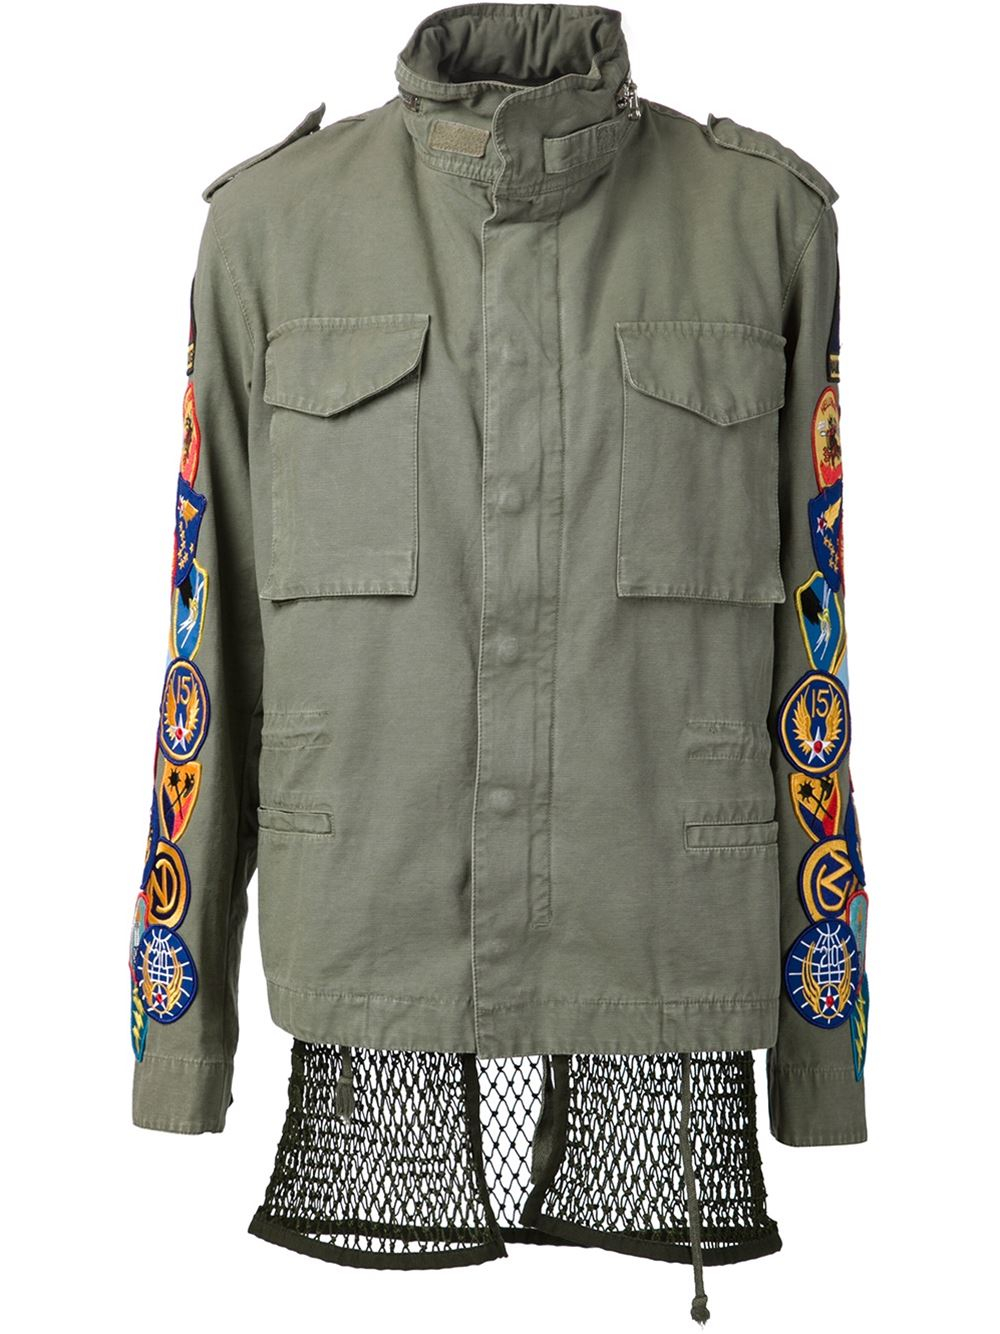 Off-White c/o Virgil Abloh Patch Military Jacket in Green - Lyst